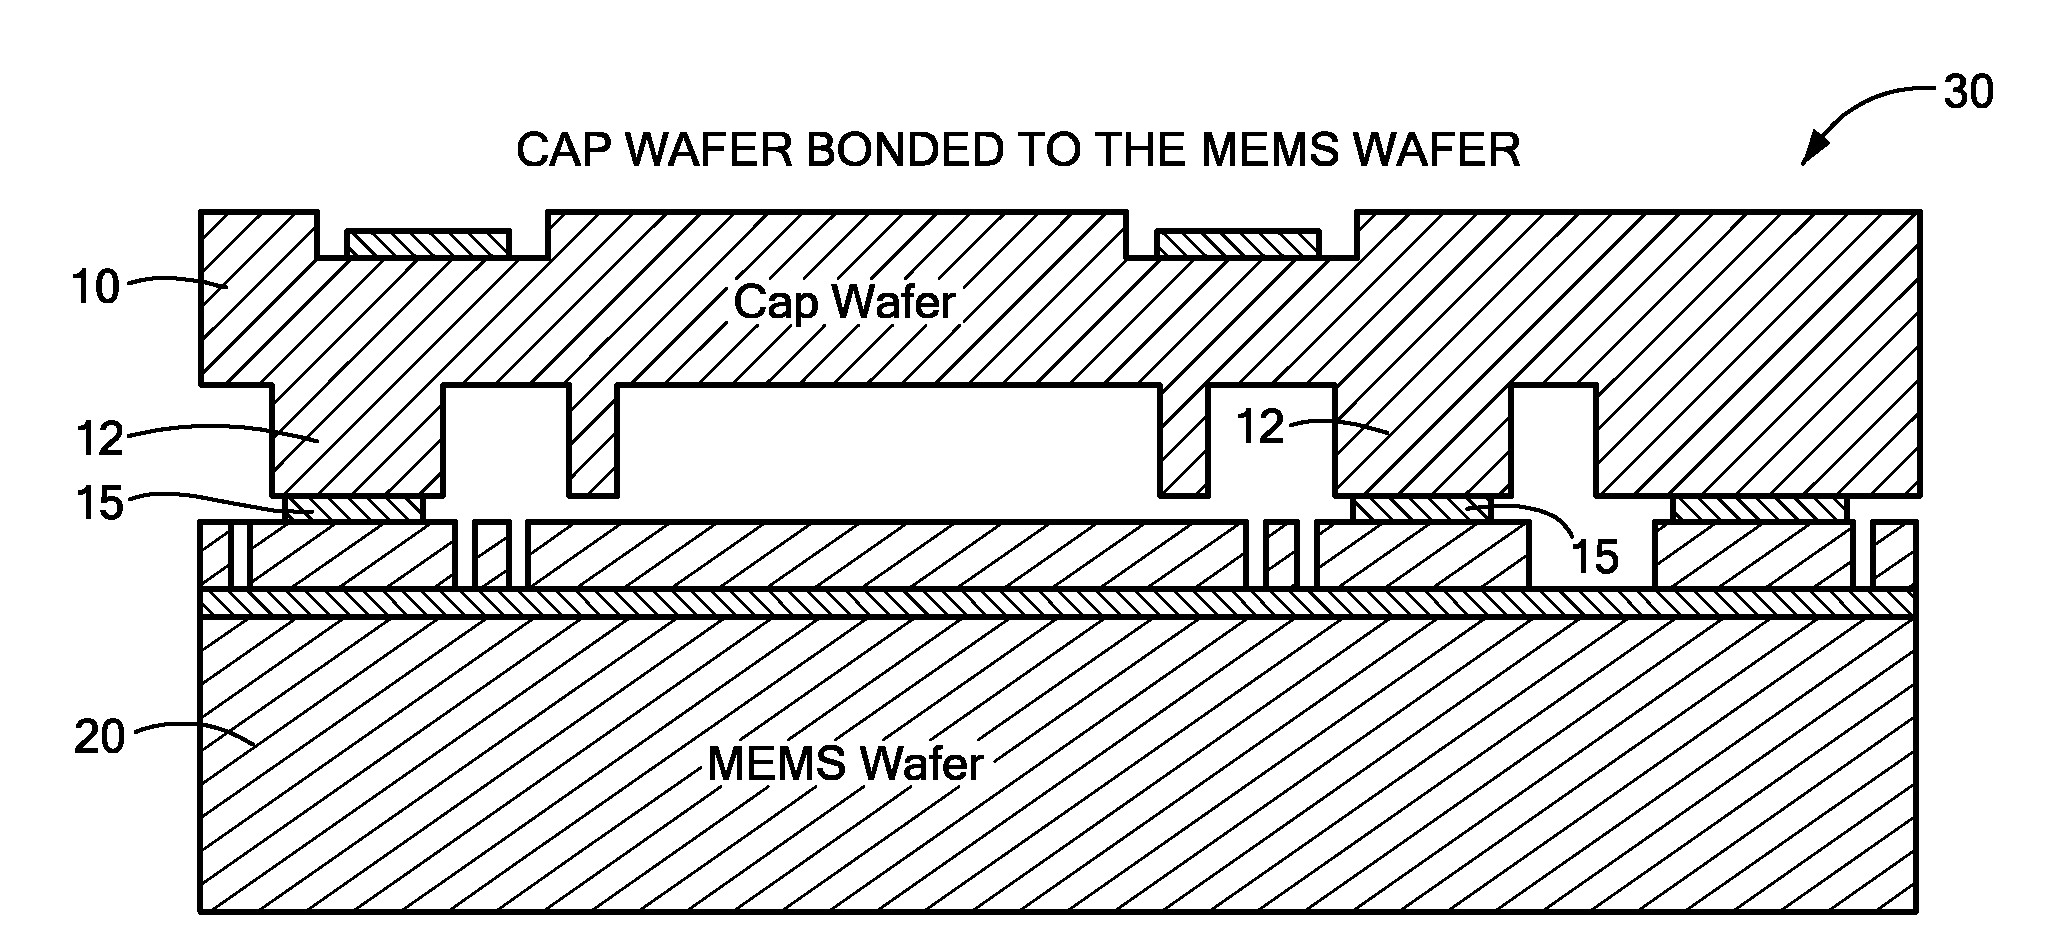 Method for Capping a MEMS Wafer